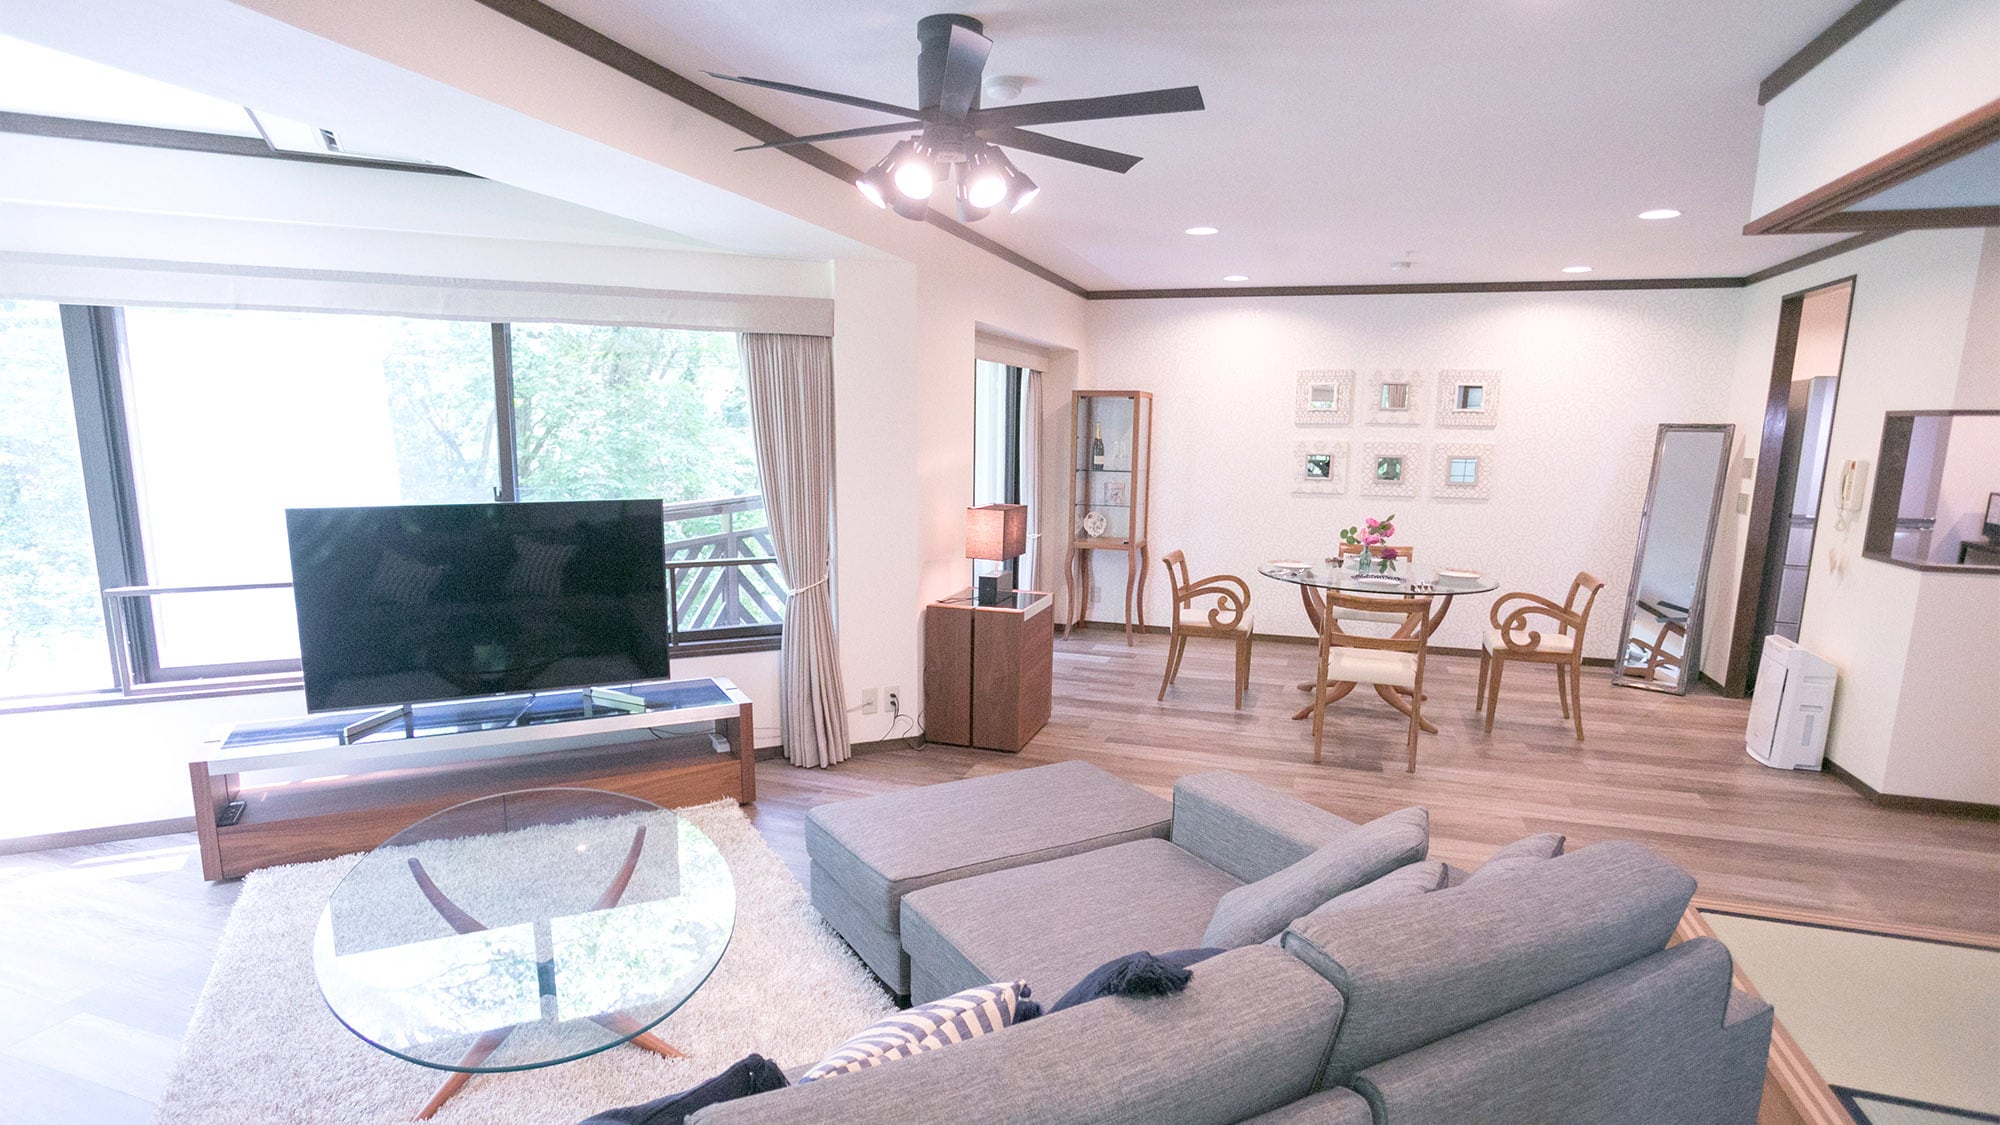 ・ It is a spacious living room